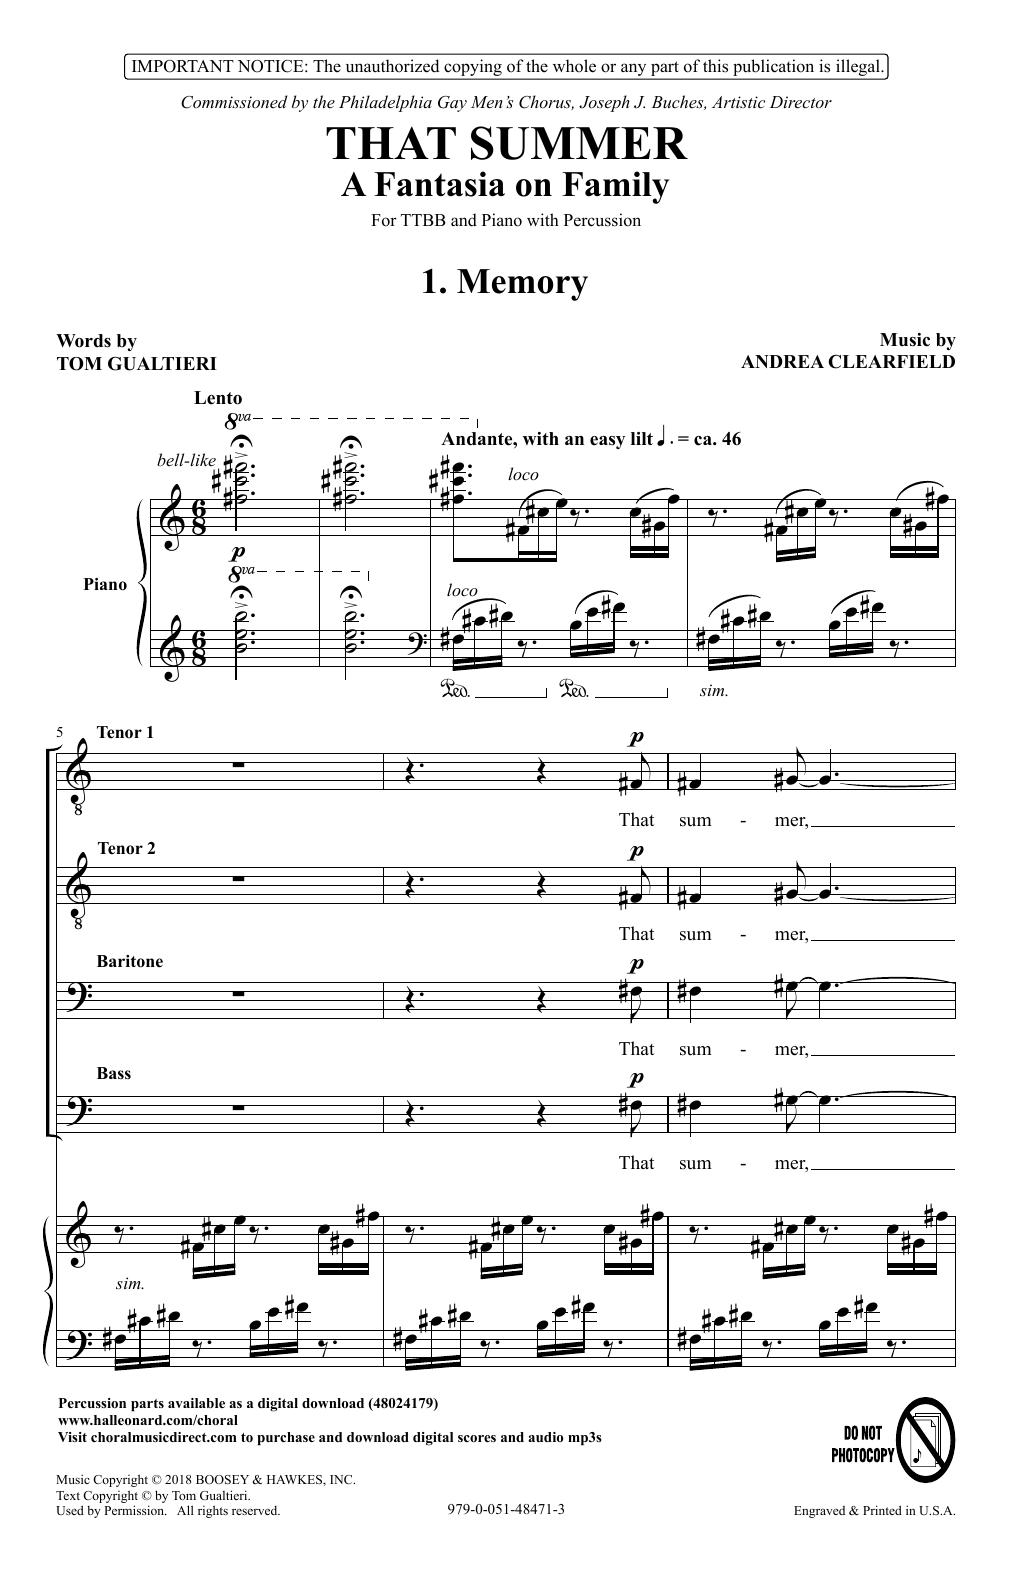 Download Tom Gualtieri & Andrea Clearfield That Summer: A Fantasia On Family Sheet Music